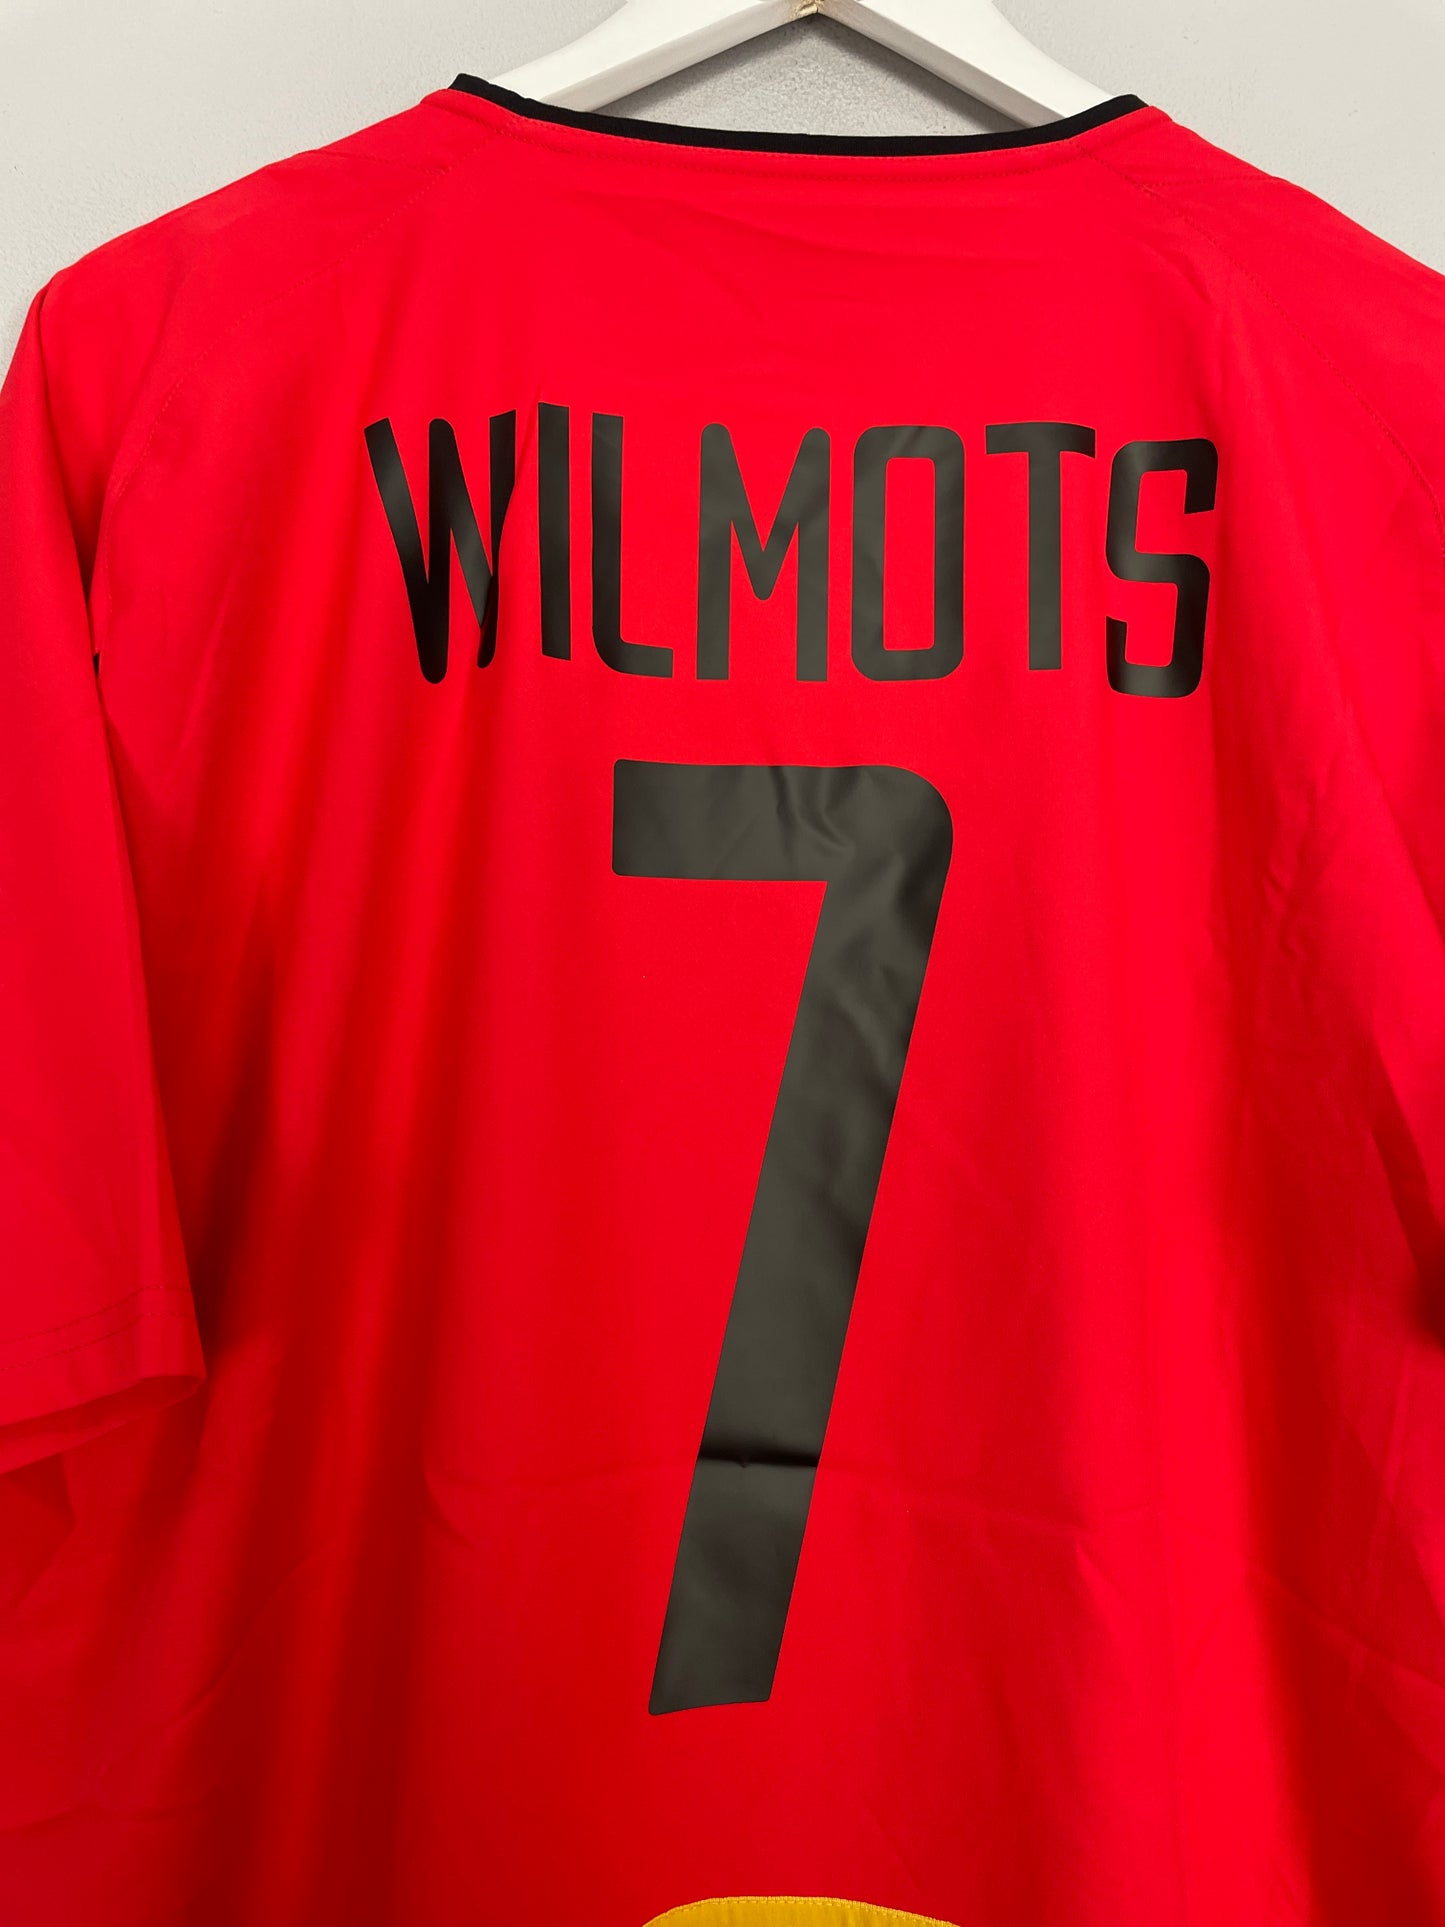 2002/04 BELGIUM WILMOTS #7 *PLAYER ISSUE* HOME SHIRT (L) NIKE